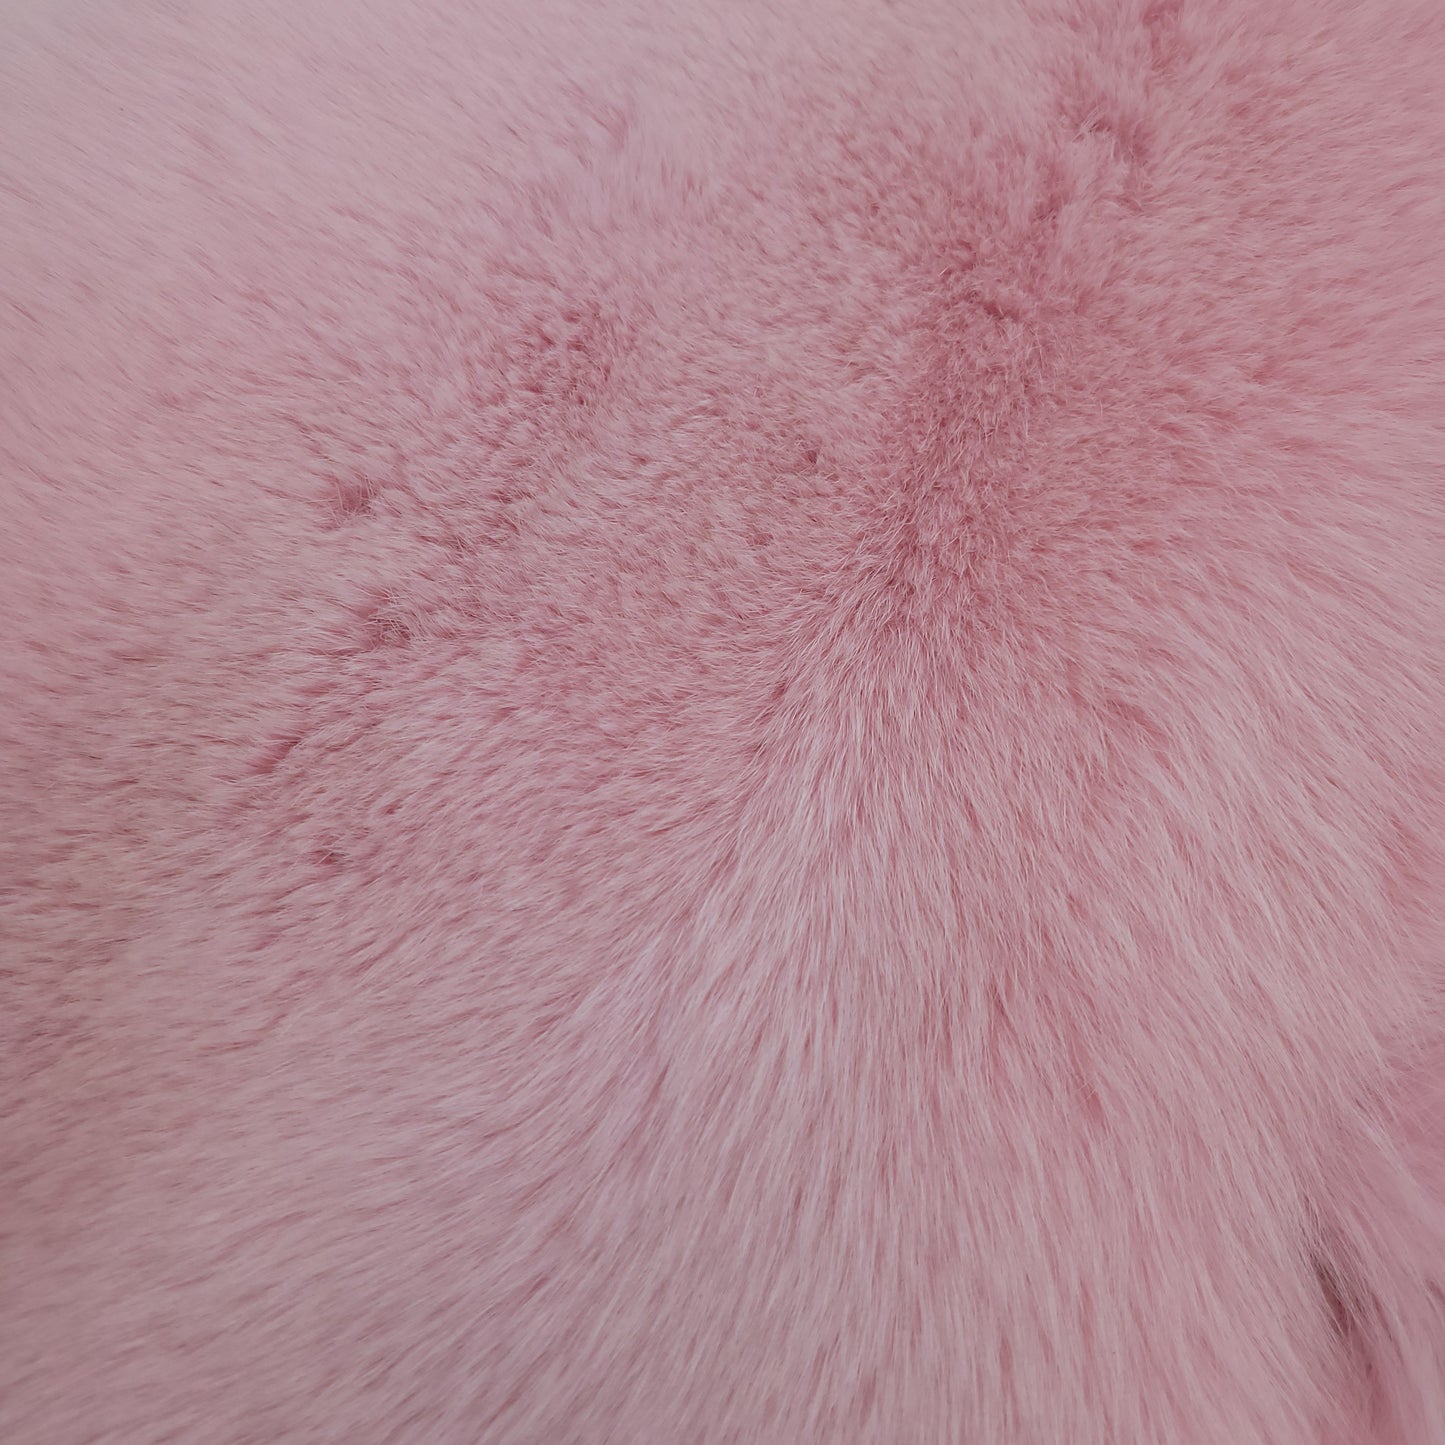 Dyed Shadow Fox Fur - Baby Pink